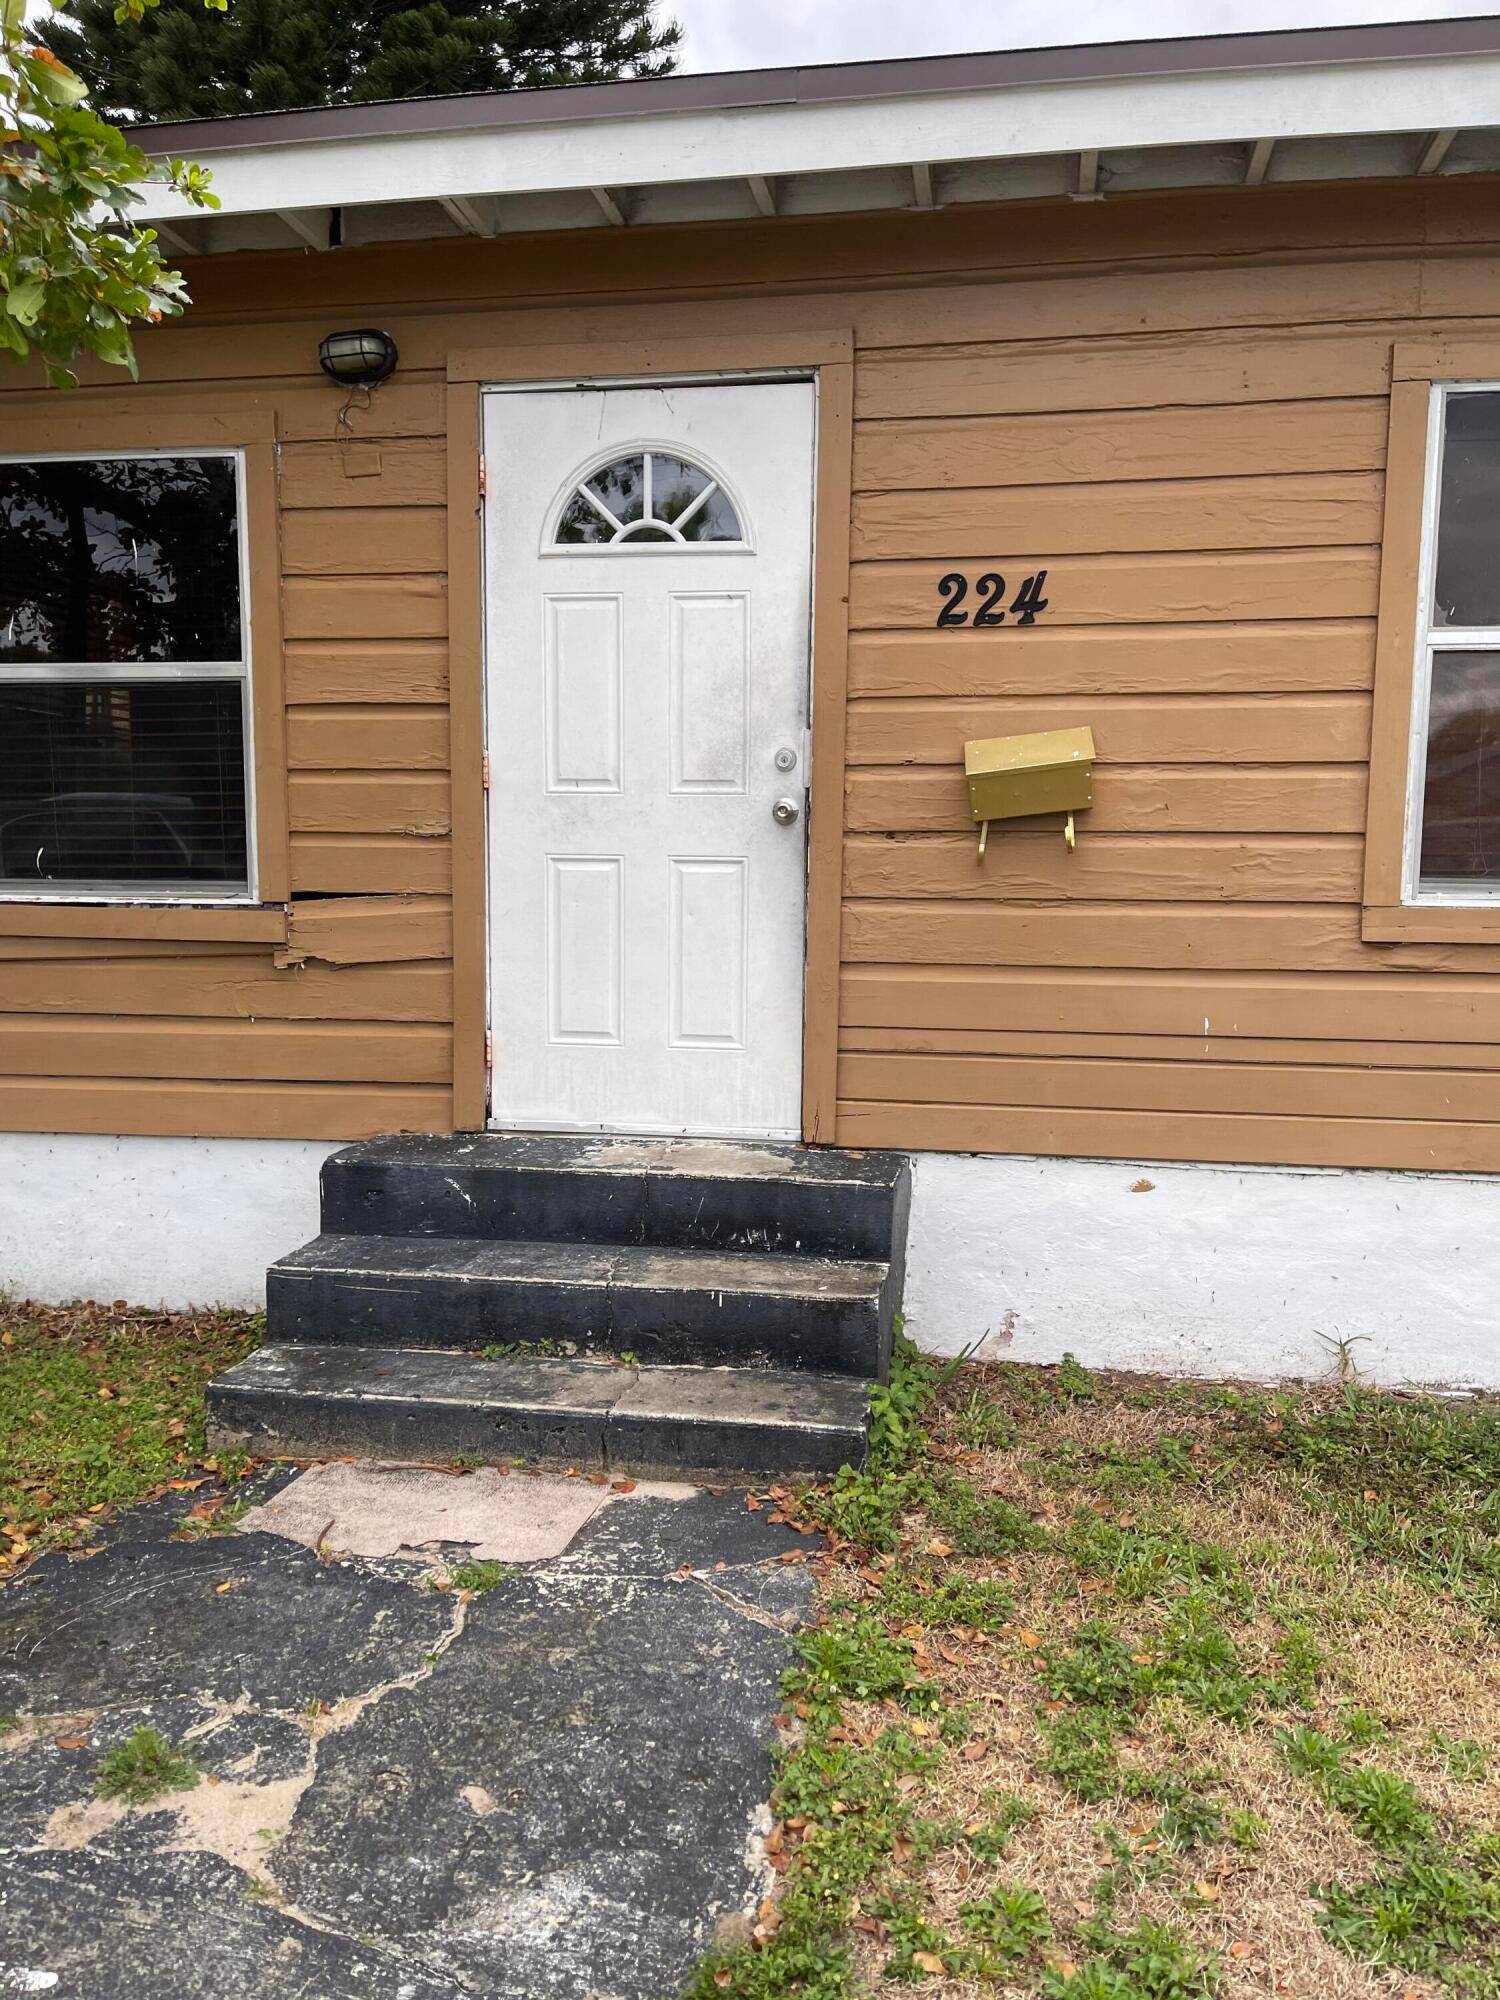 Location Location this is a must see 2 Bedroom 1 Bedroom with an updated kitchen.